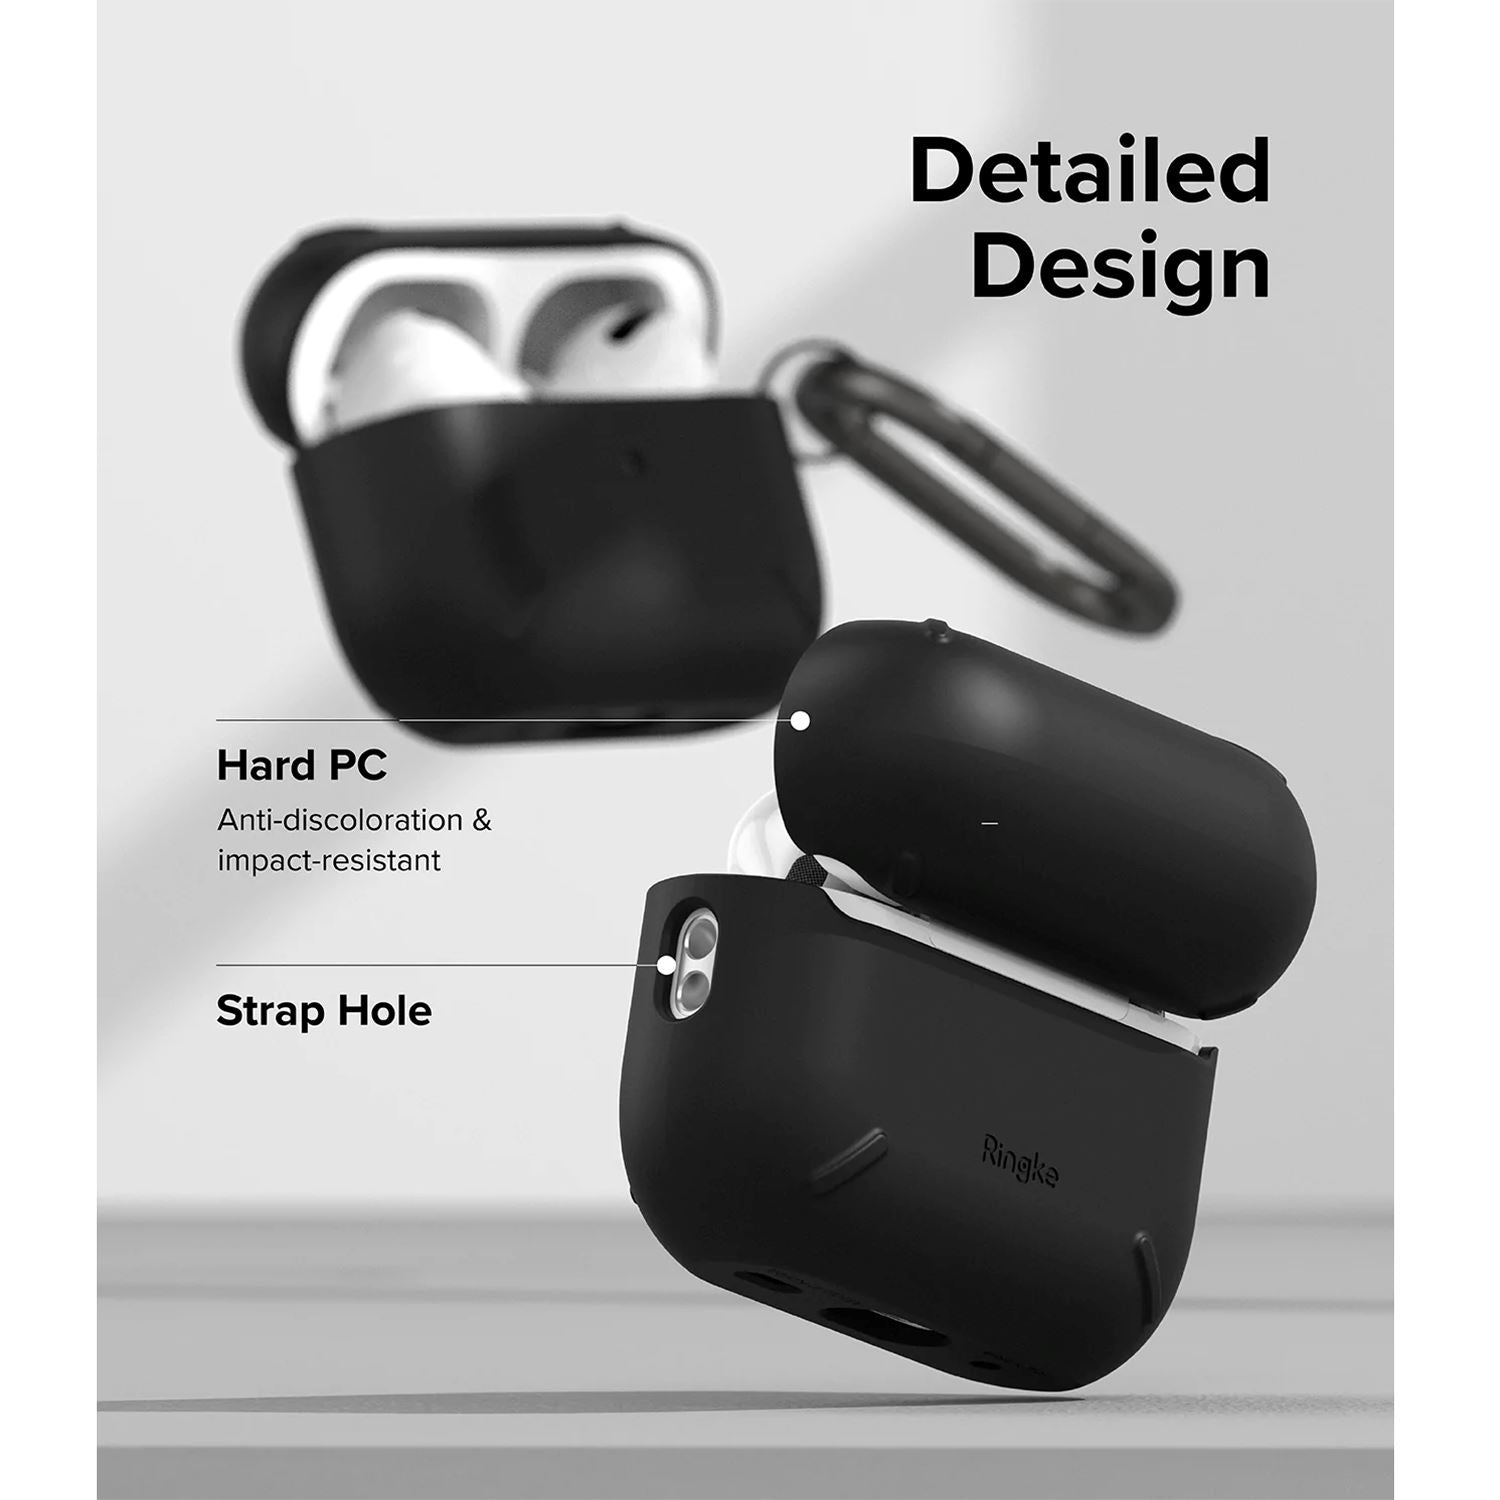 Ringke Layered Case for AirPods Pro 2 ONE2WORLD 